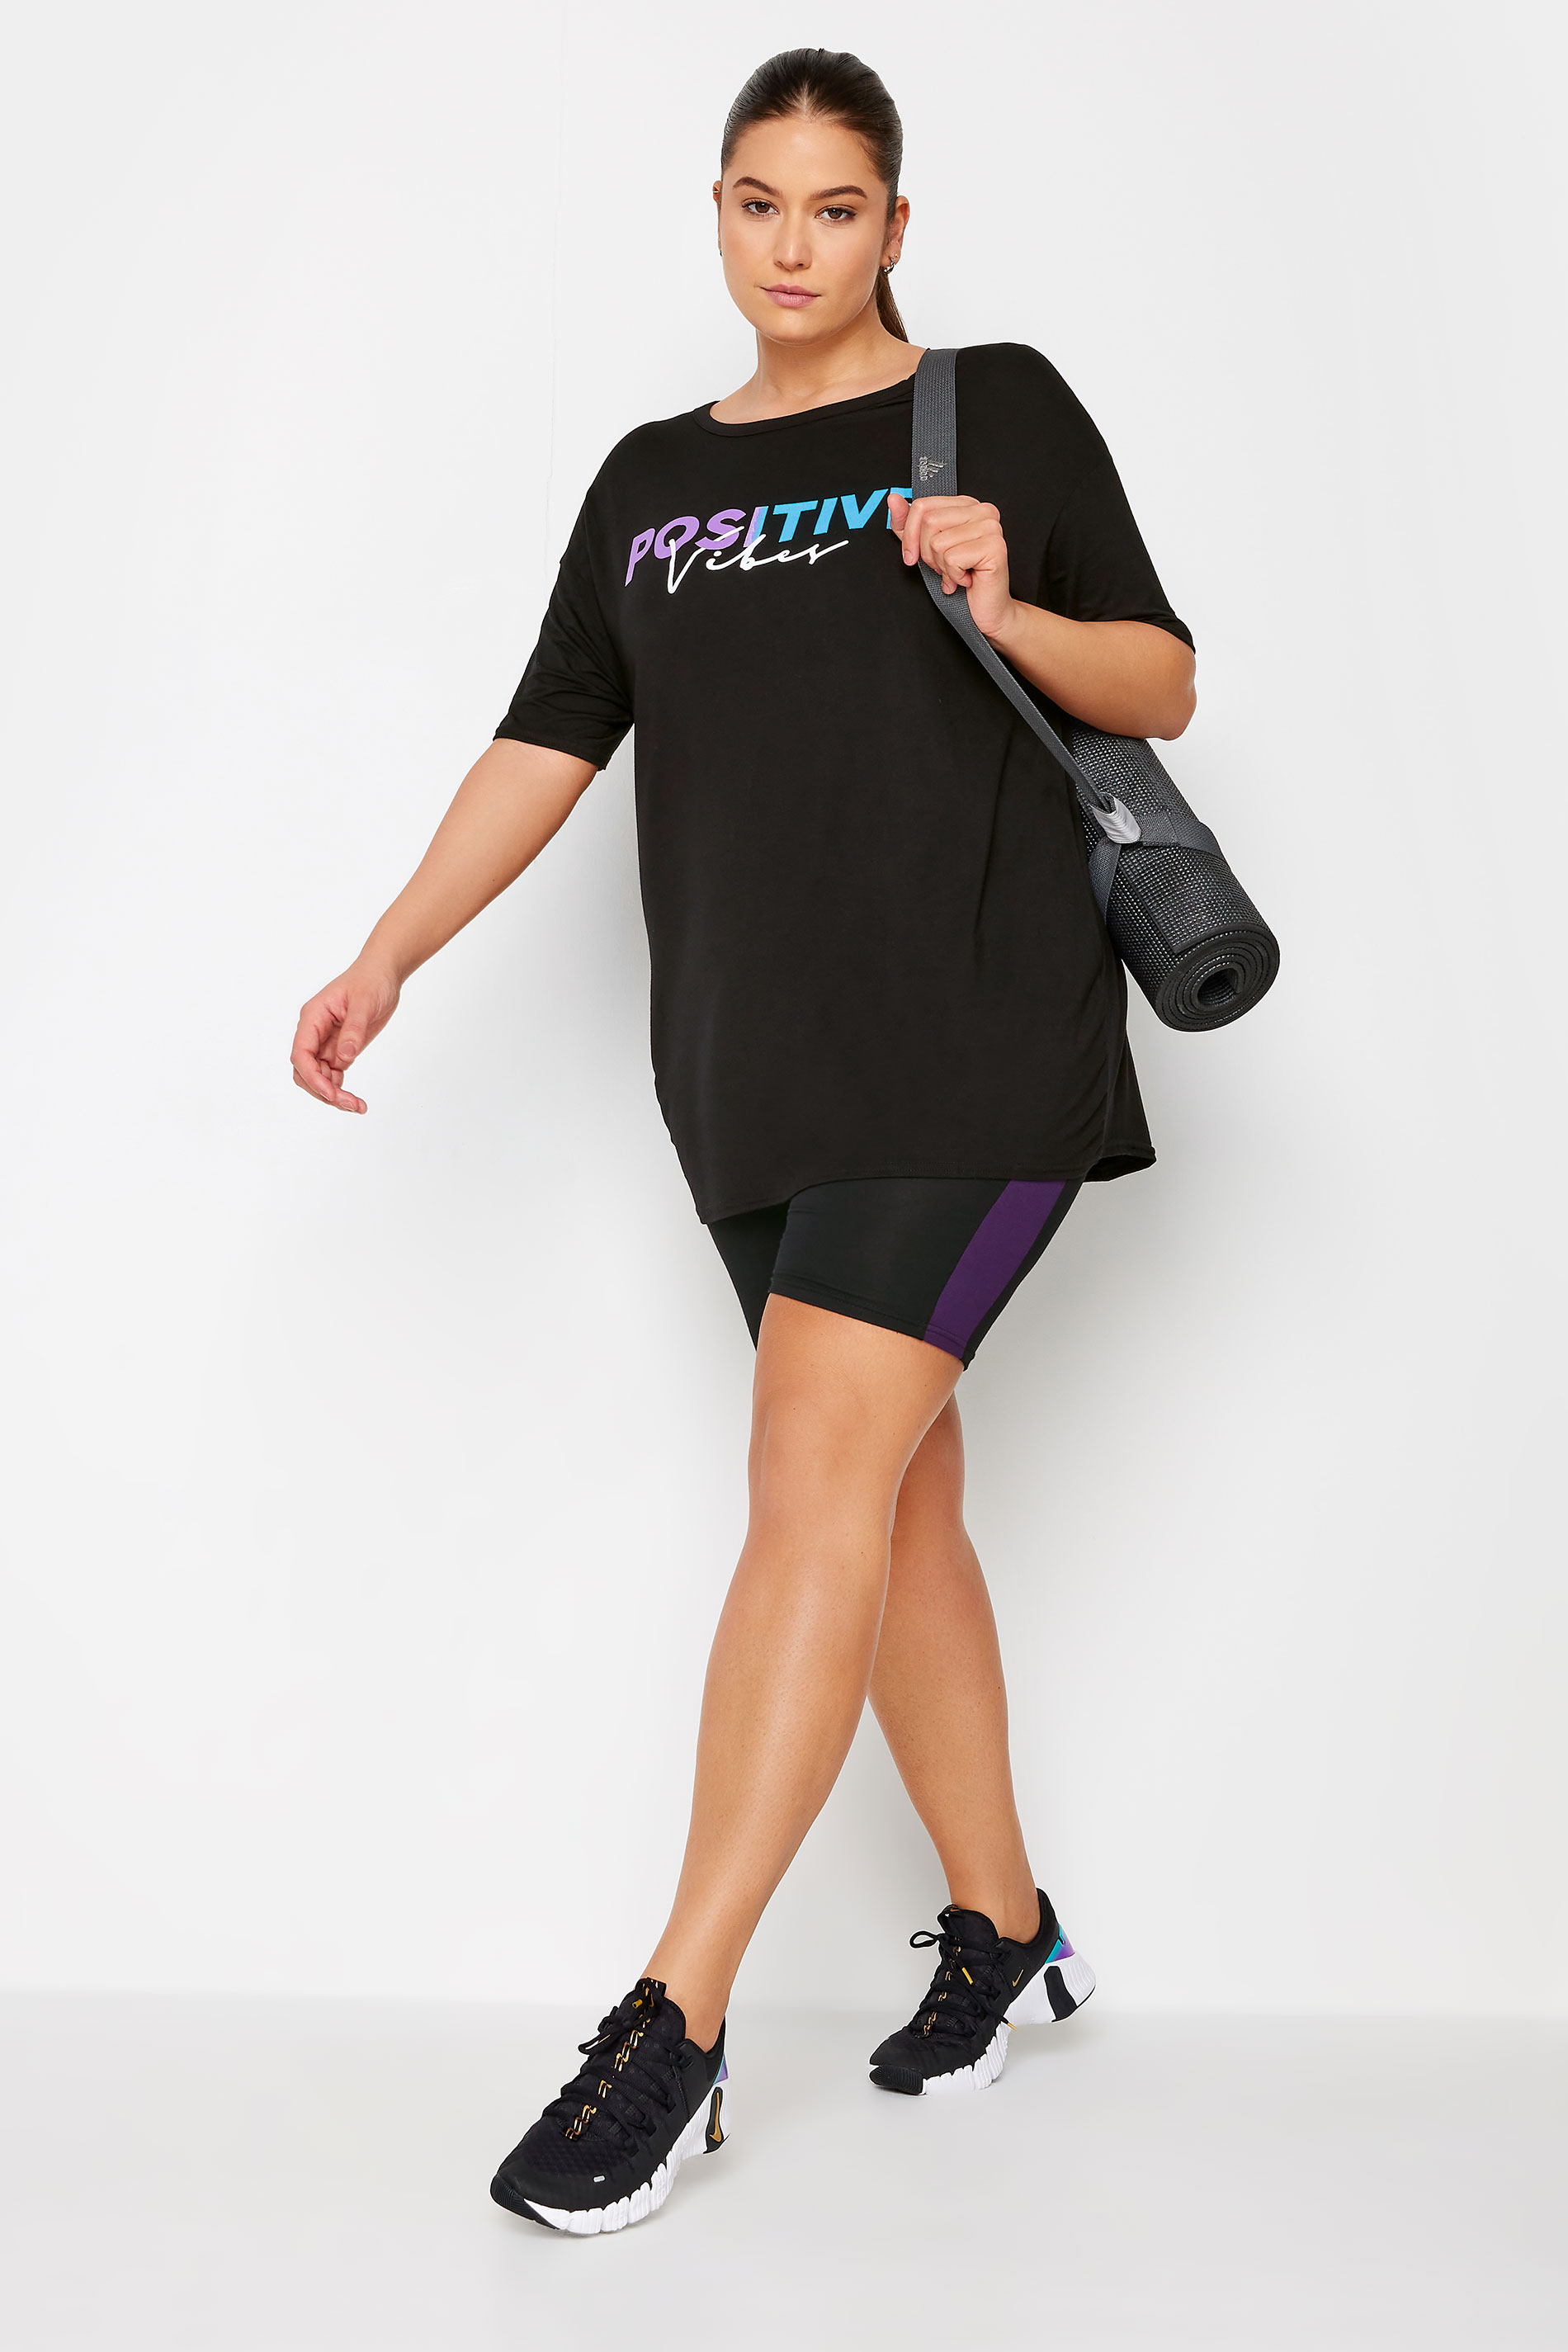 YOURS ACTIVE Plus Size Black 'Positive Vibes' Slogan Top | Yours Clothing 2